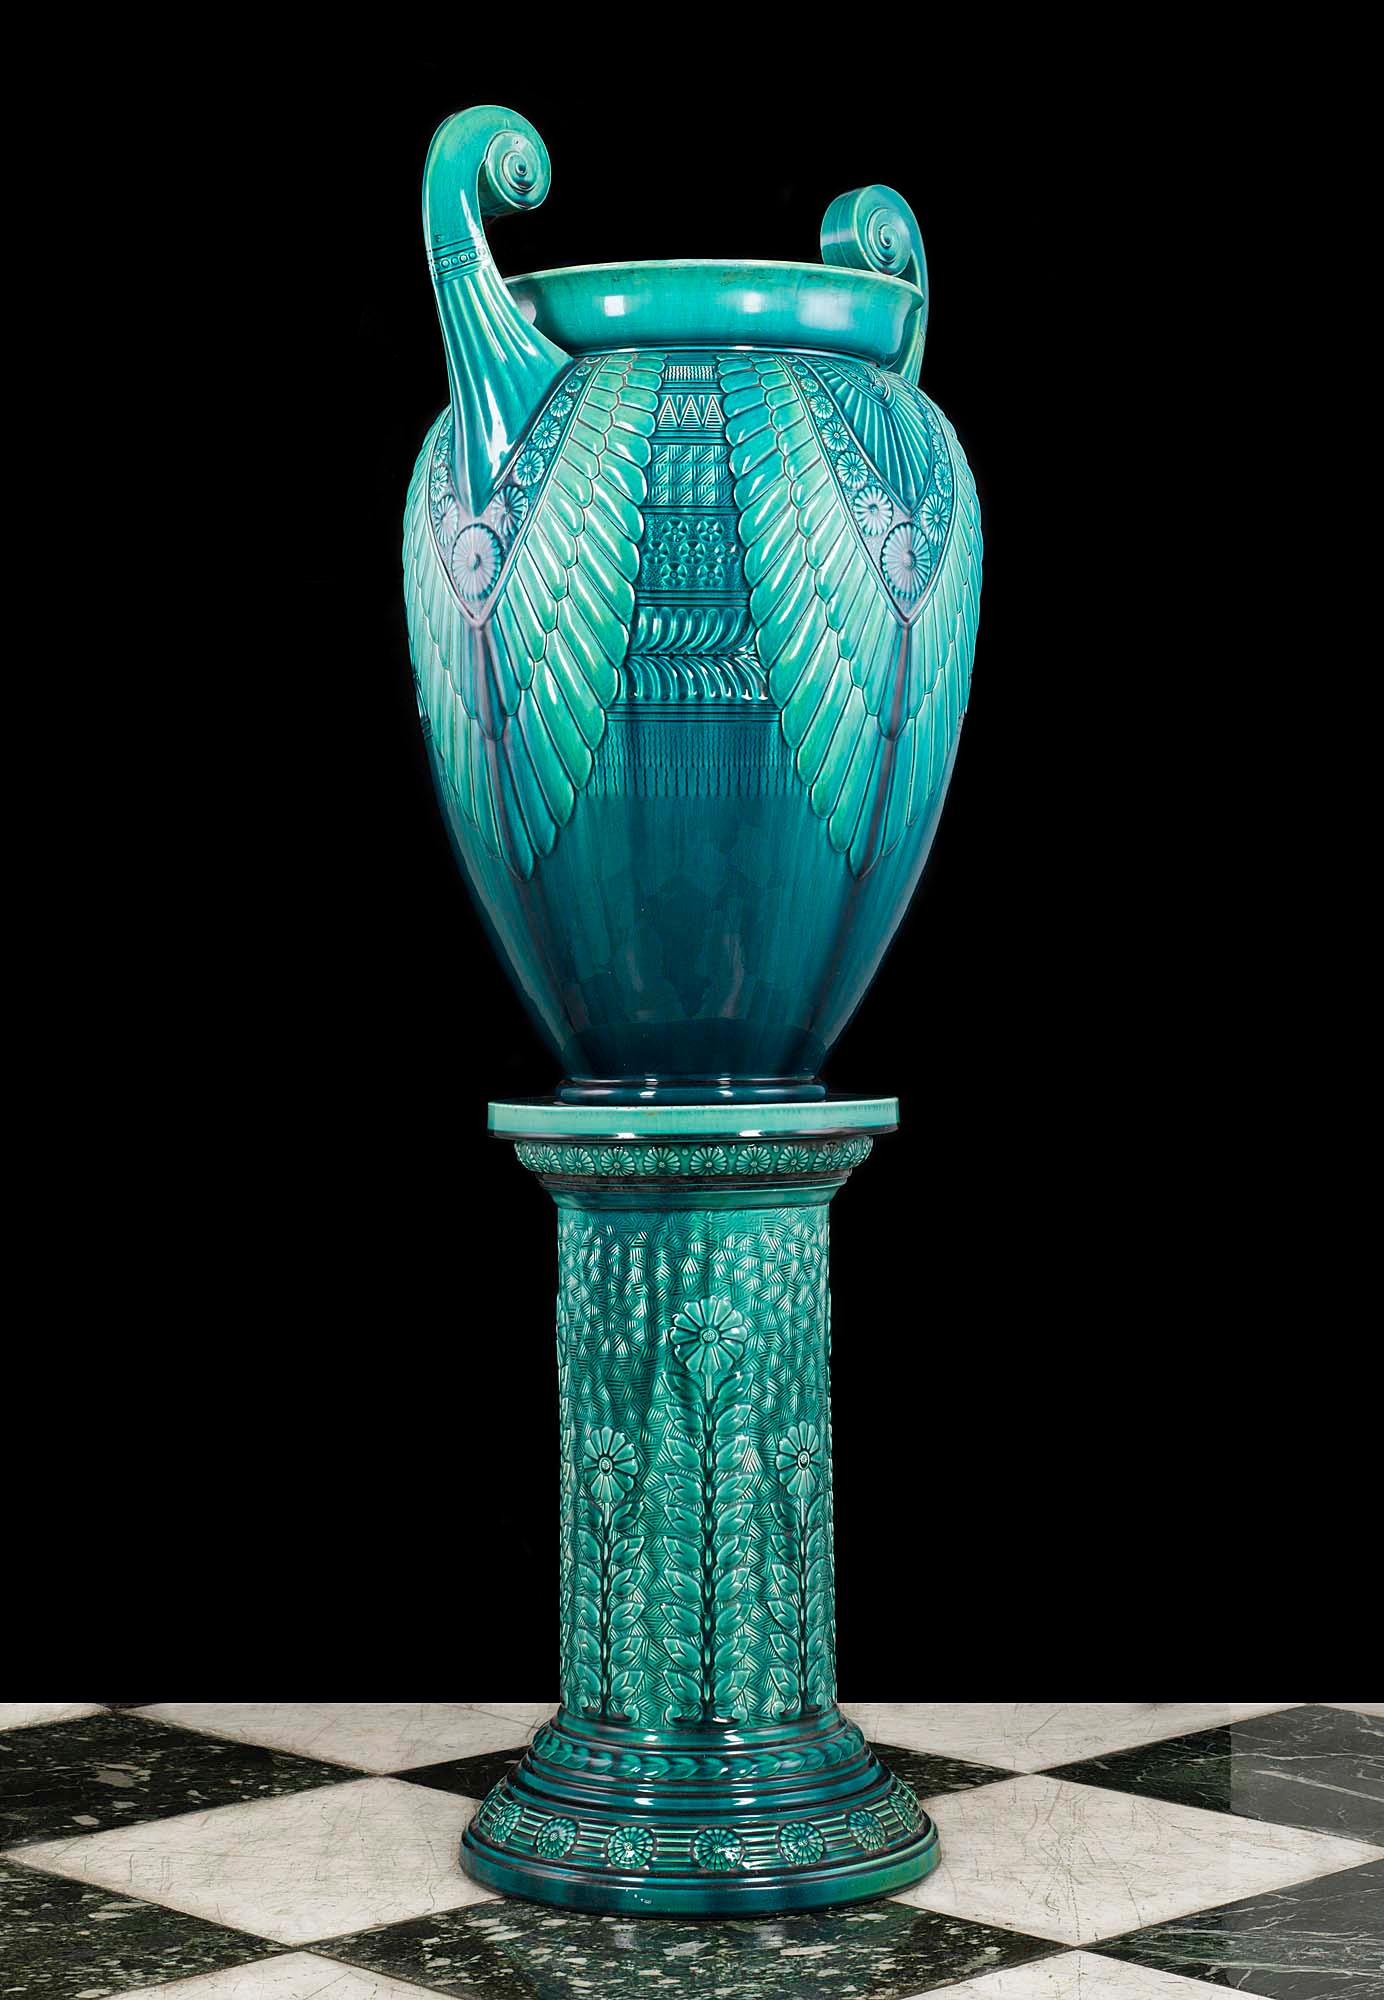 A large and rare glazed turquoise ceramic jardinière and Stand in the Egyptian manner designed by Christopher Dresser and made by the Linthorpe Art Pottery in Middlesbrough.

The jardinière is stamped with the makers name on the base, along with